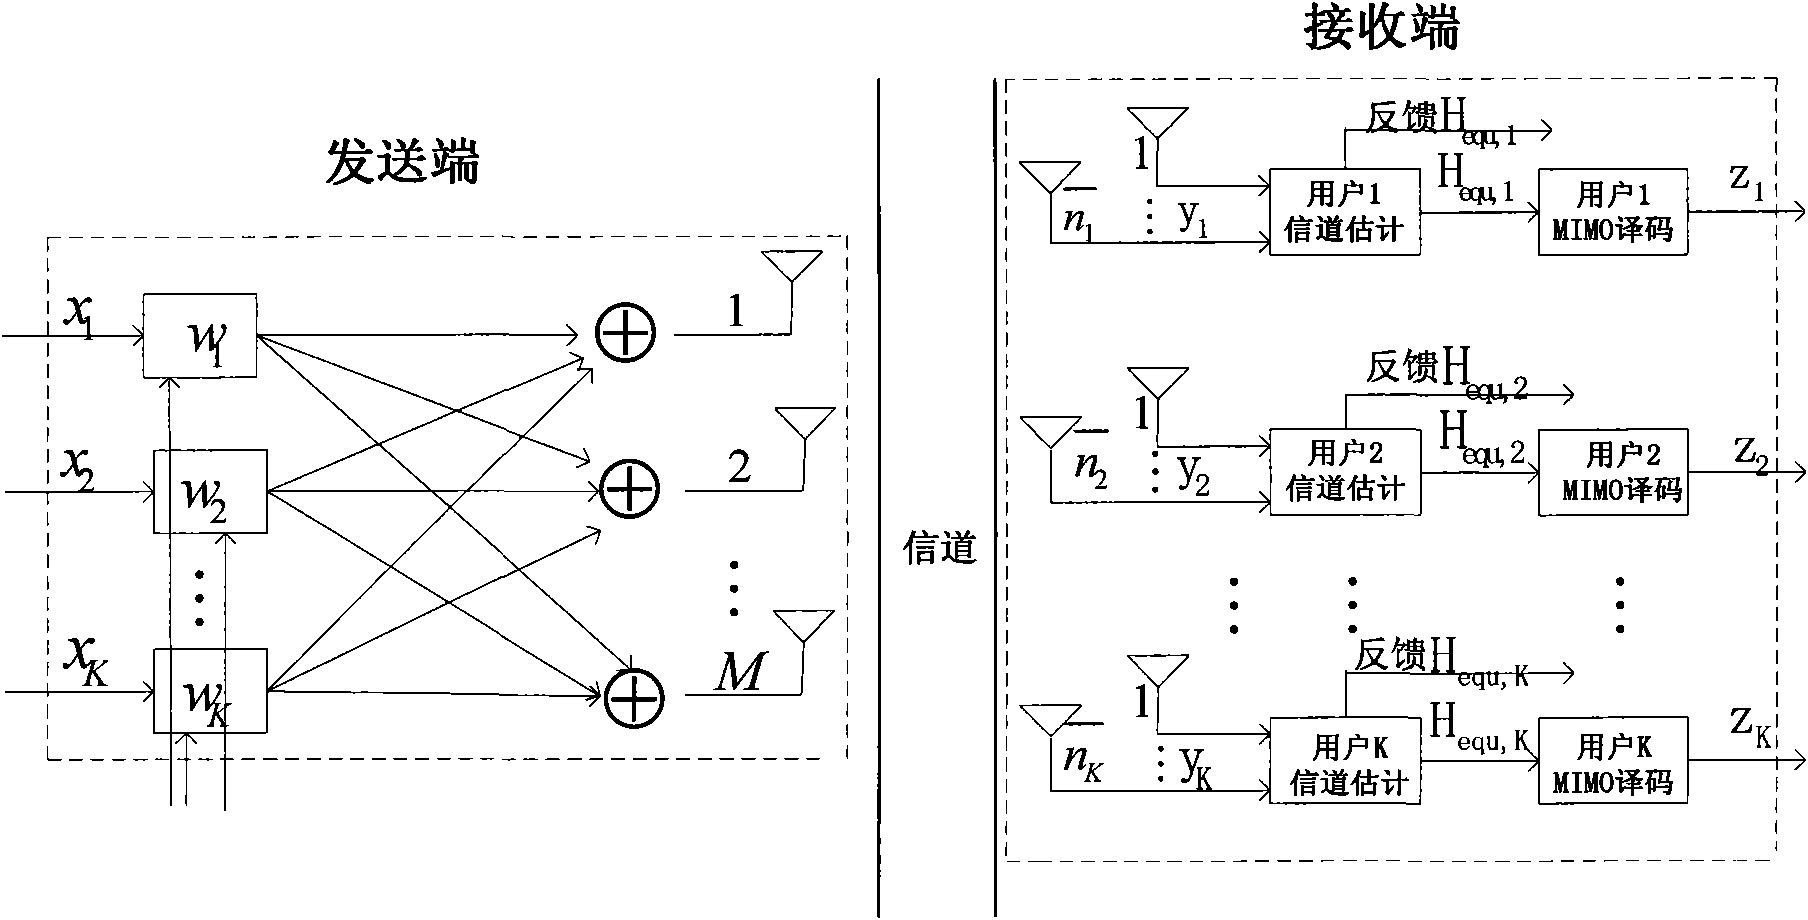 Pre-coding method for multi-user MIMO system